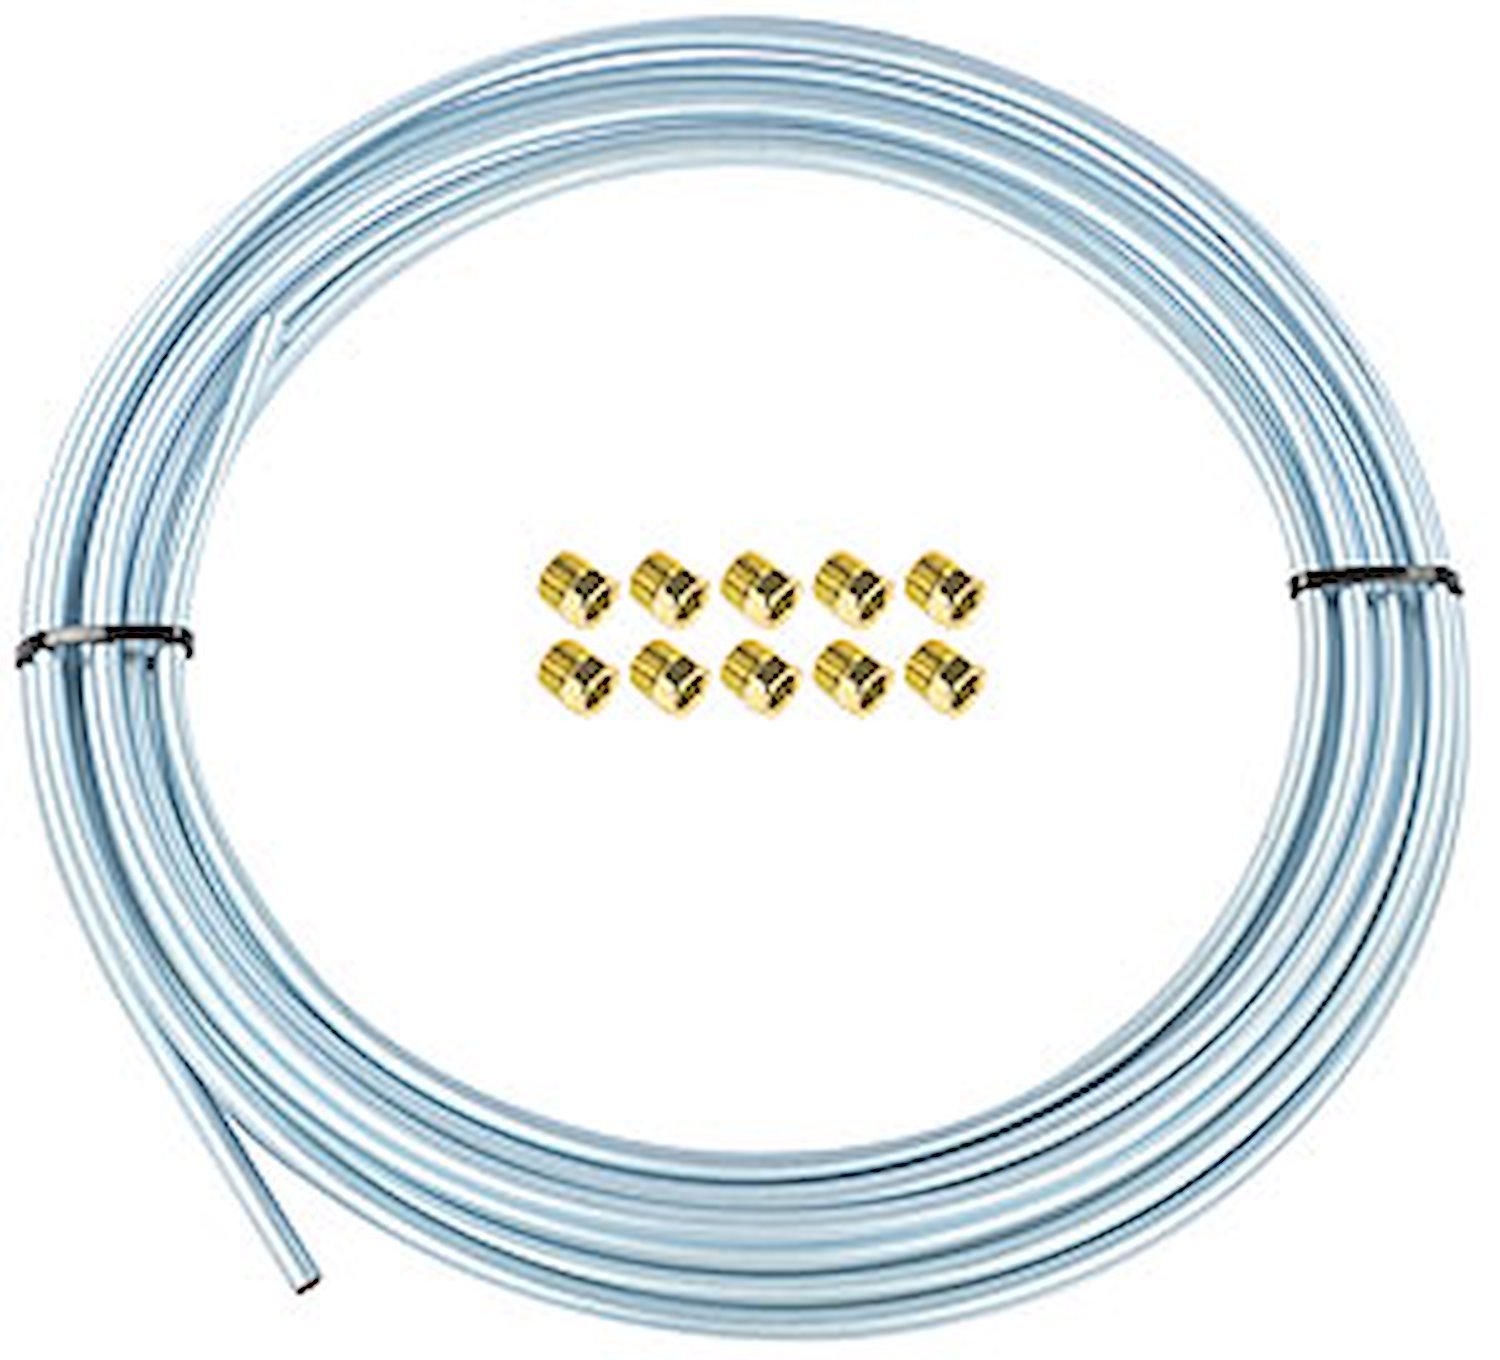 Zinc Fuel and Transmission Cooler Tubing Kit 3/8 in. Diameter x 25 ft.